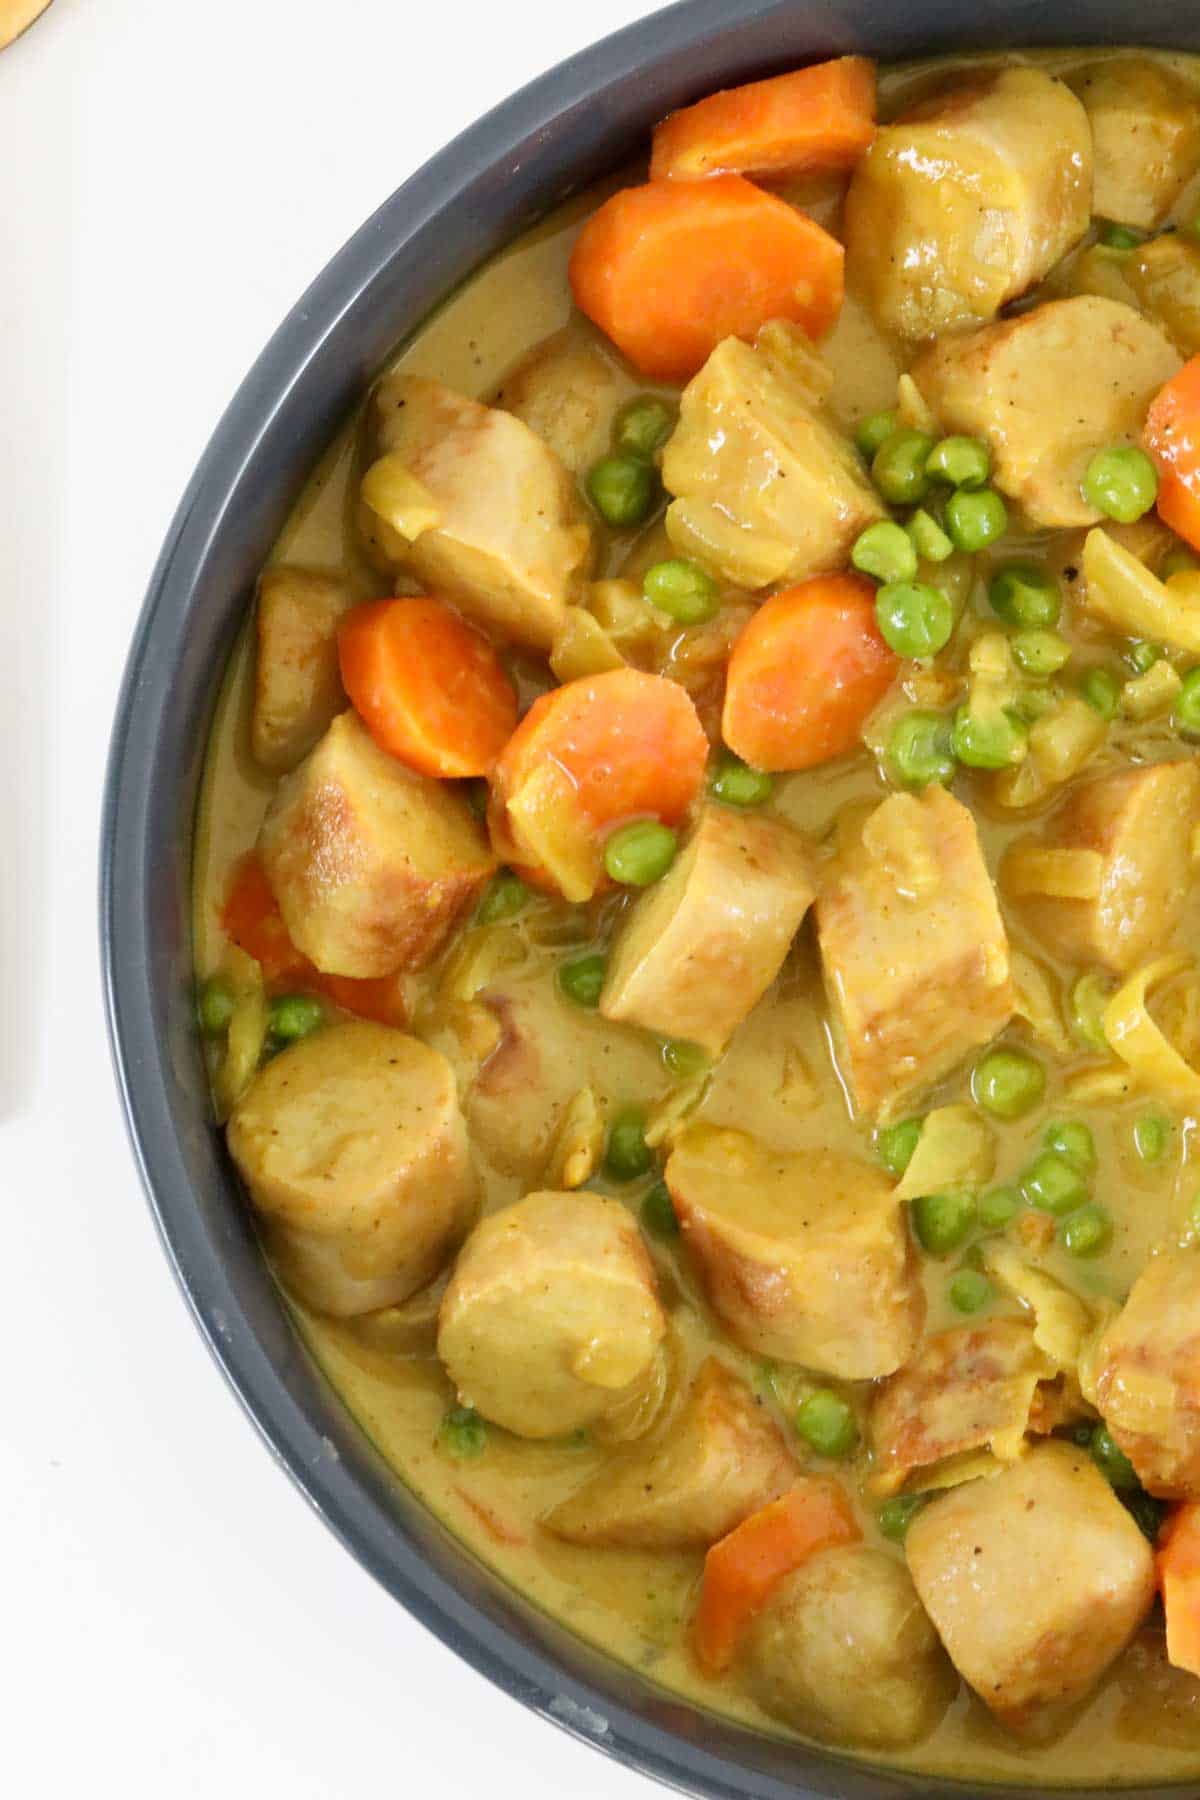 Chunks of sausage, peas and sliced carrot in a gravy .